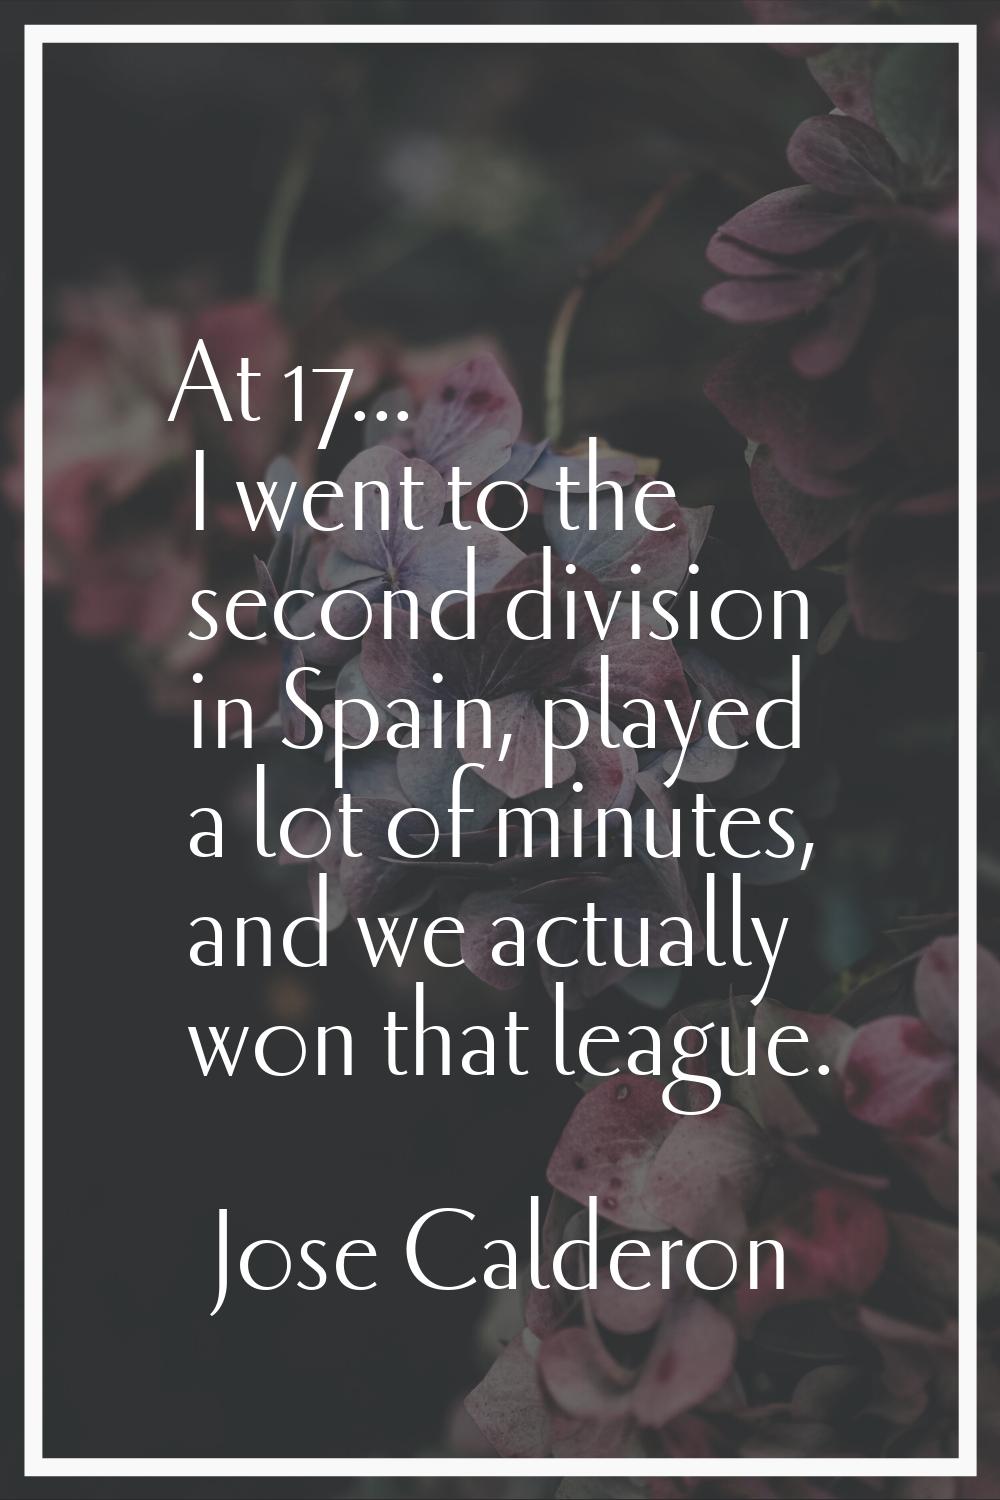 At 17... I went to the second division in Spain, played a lot of minutes, and we actually won that 